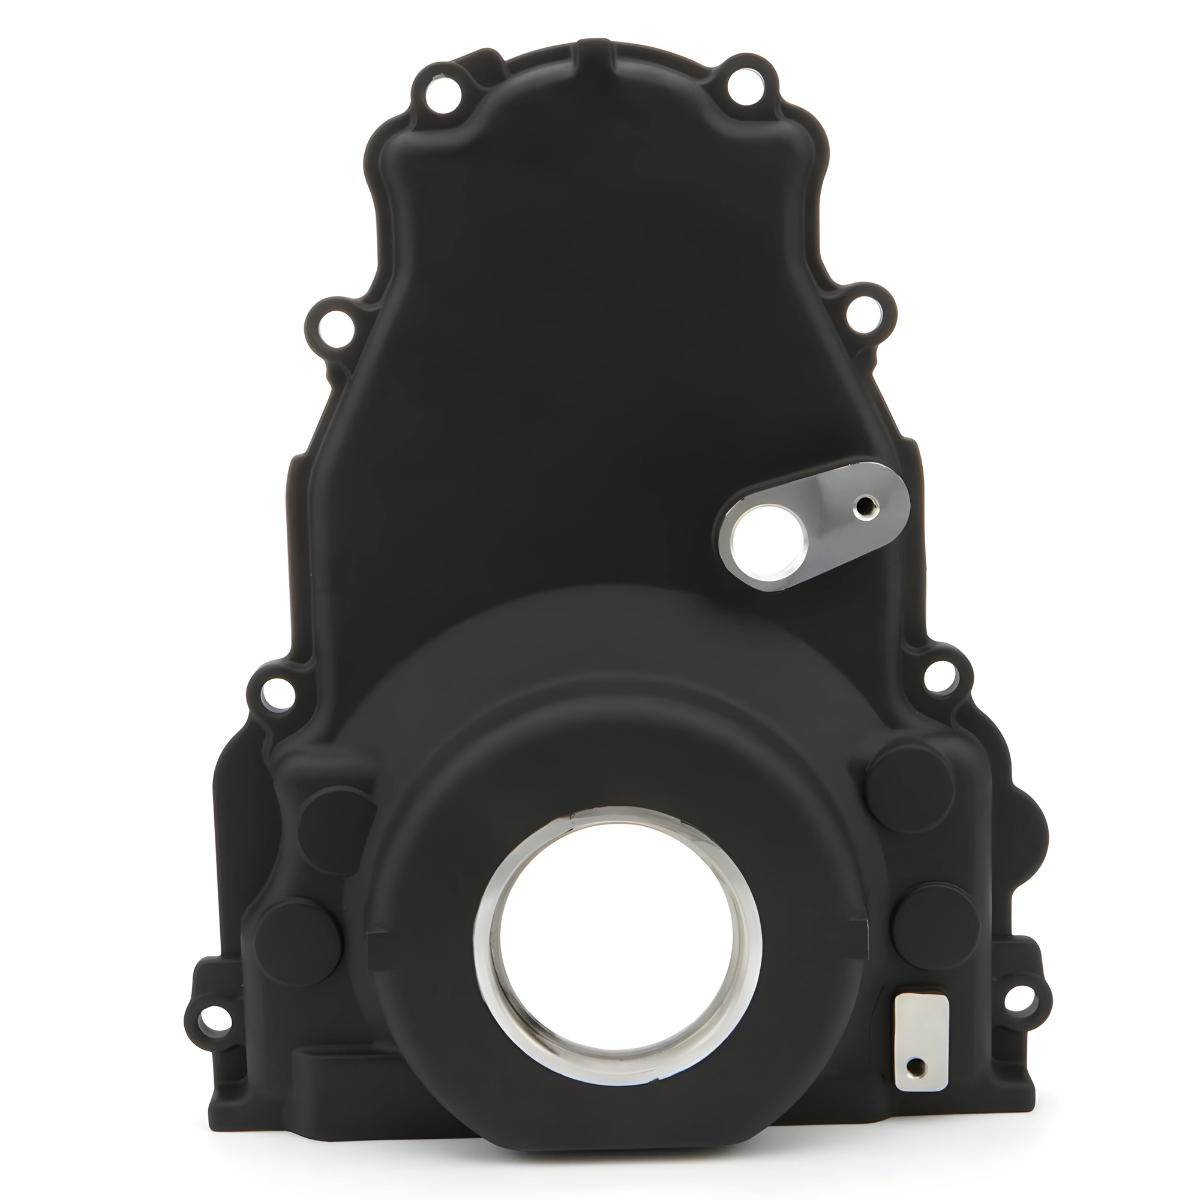 Racing Power Company R8471BK GM LS Alum Timing Cover Fit LS2 and LS3